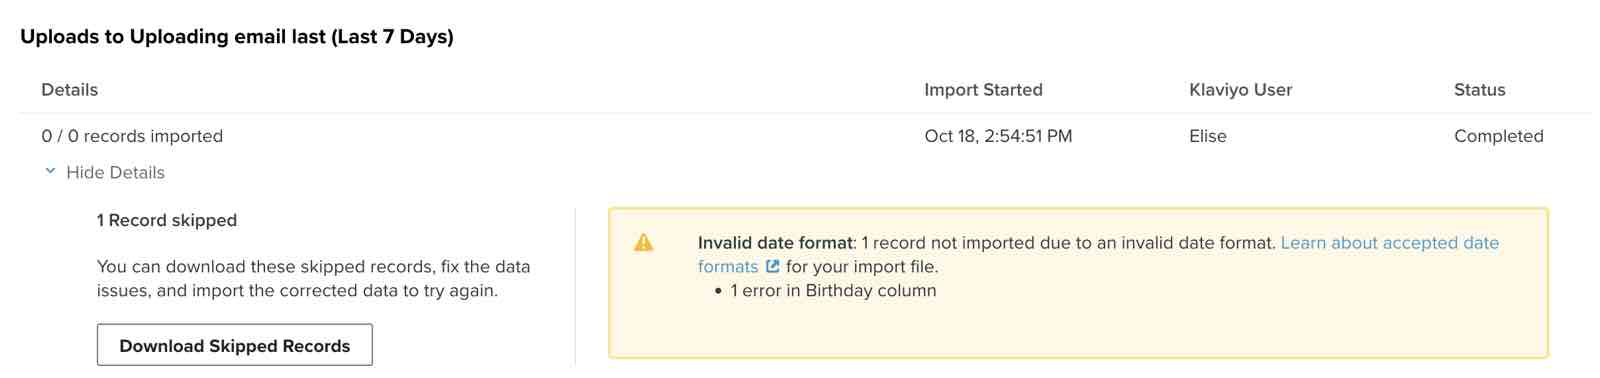 An invalid date format error message in the list upload process